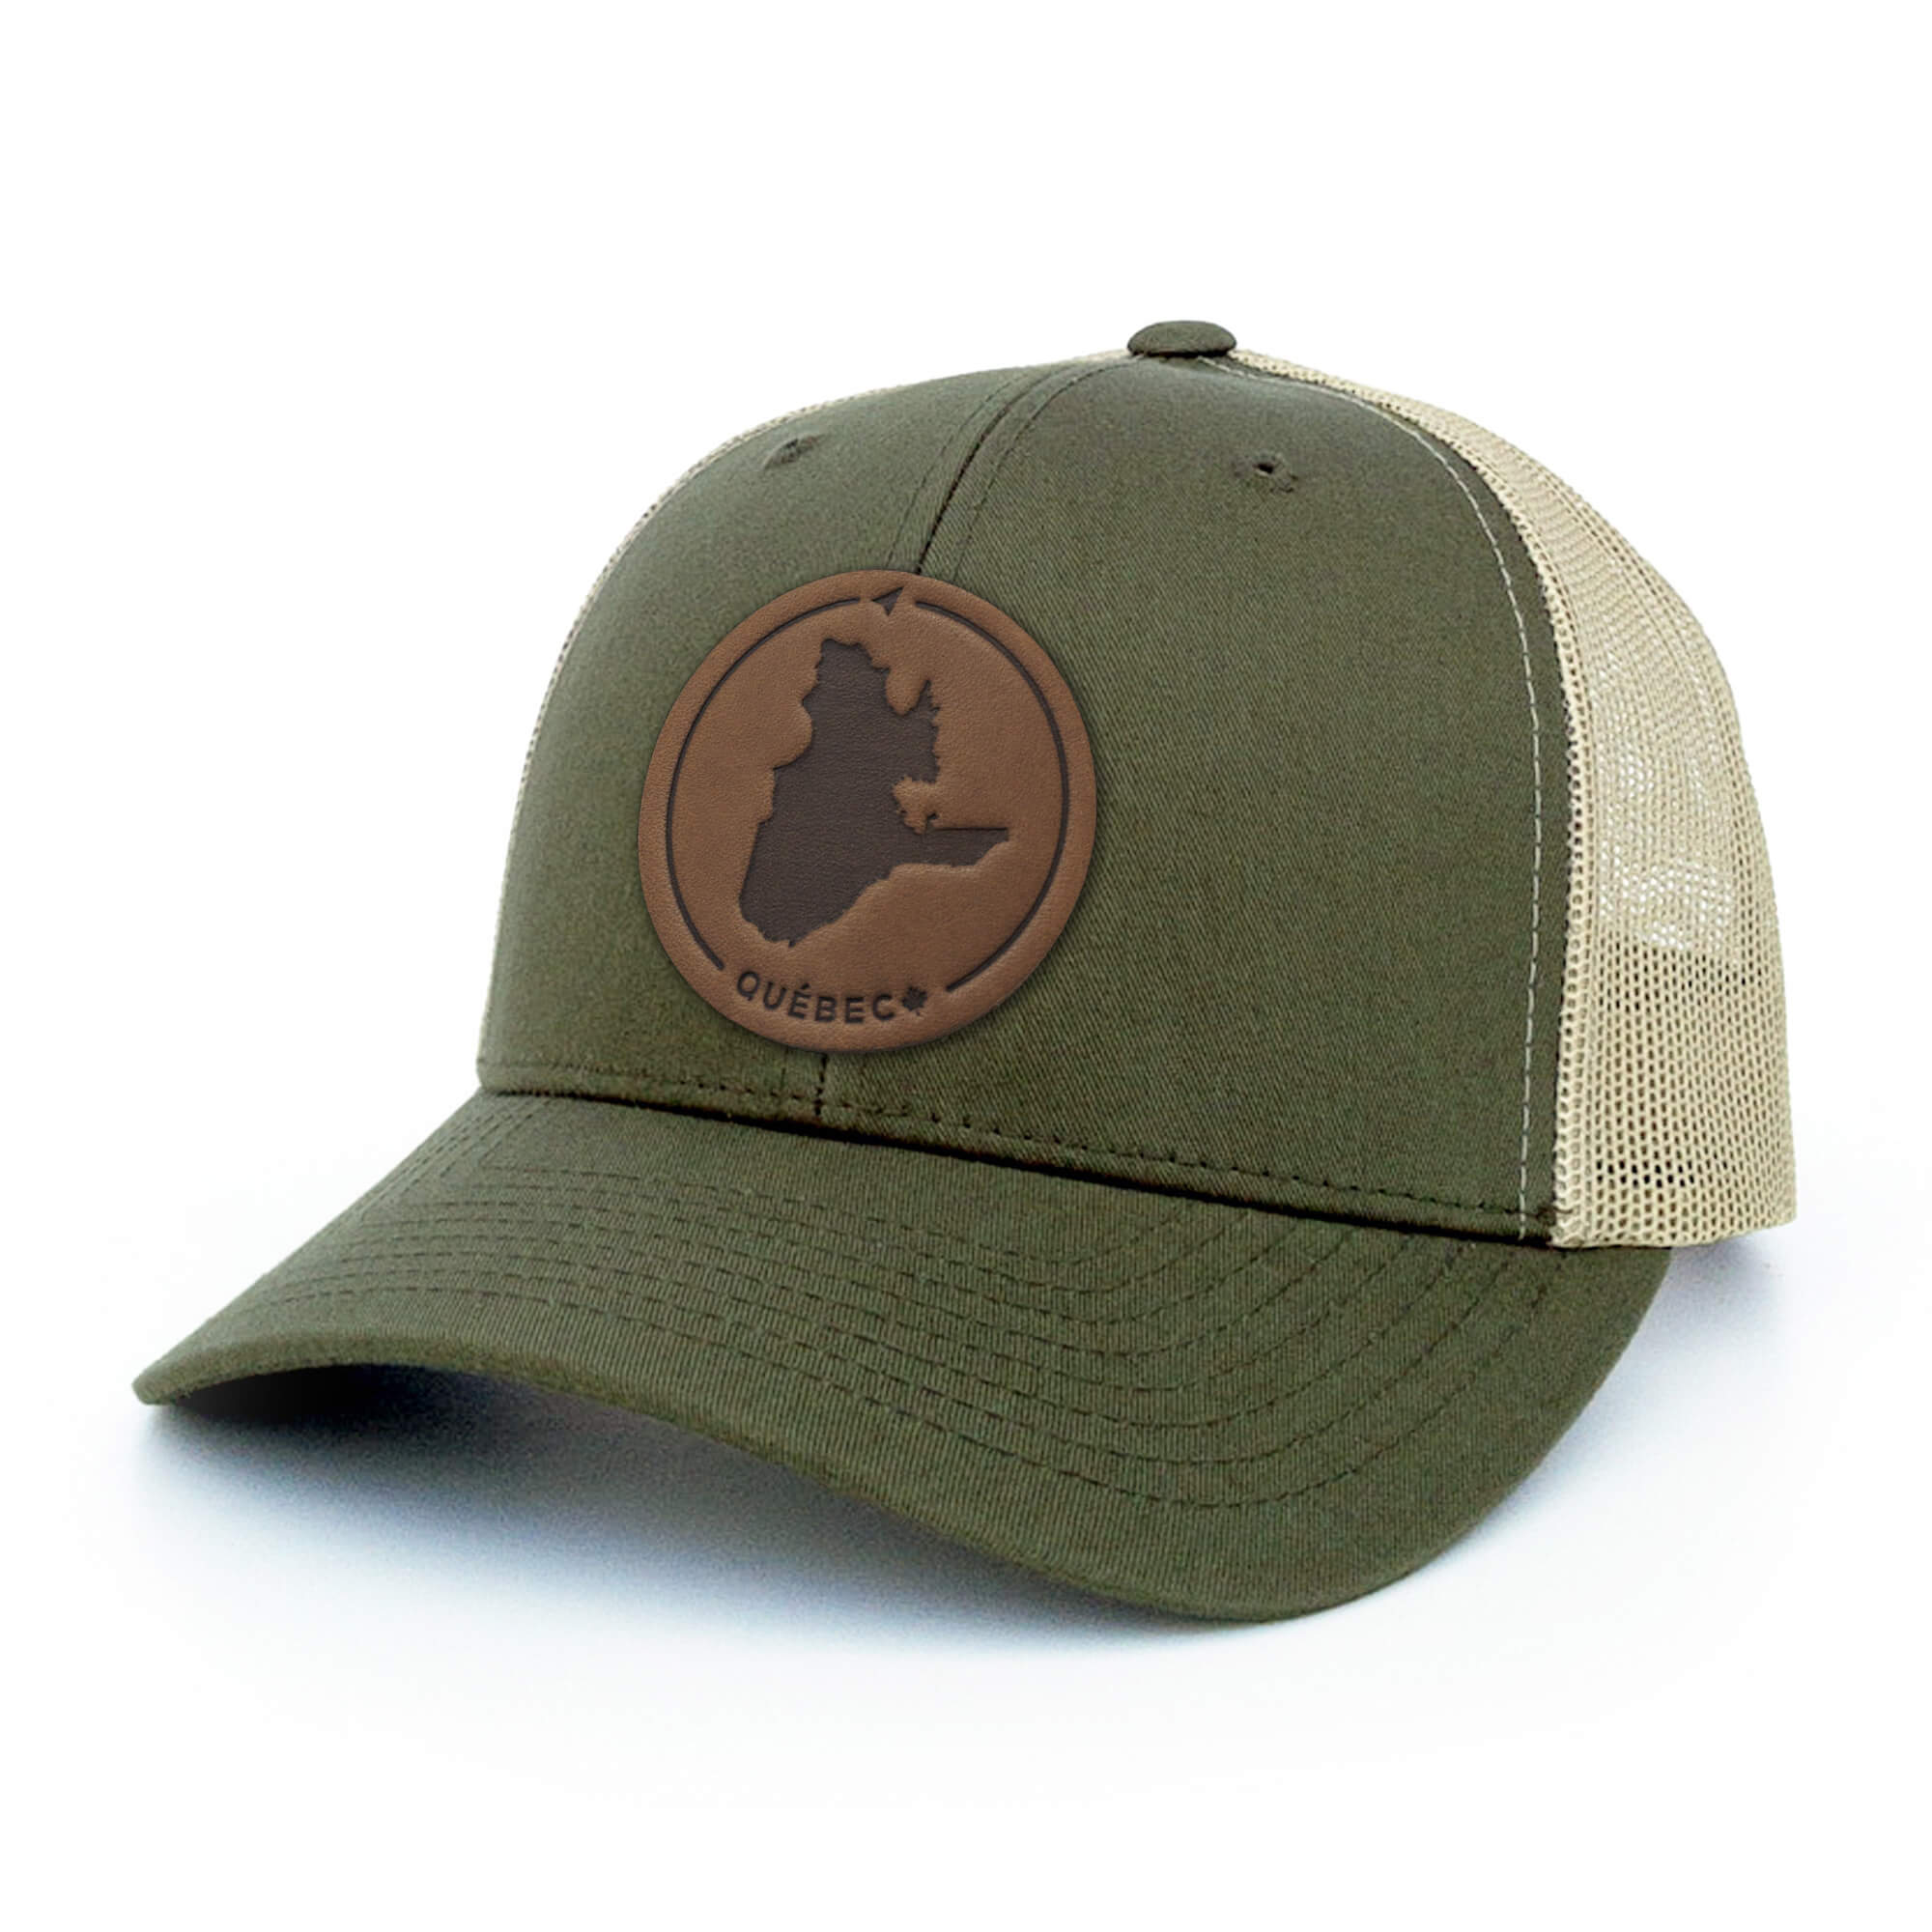 Moss Green and khaki trucker hat with full-grain leather patch of Québec | BLACK-002-006, CHARC-002-006, NAVY-002-006, HGREY-002-006, MOSS-002-006, BROWN-002-006